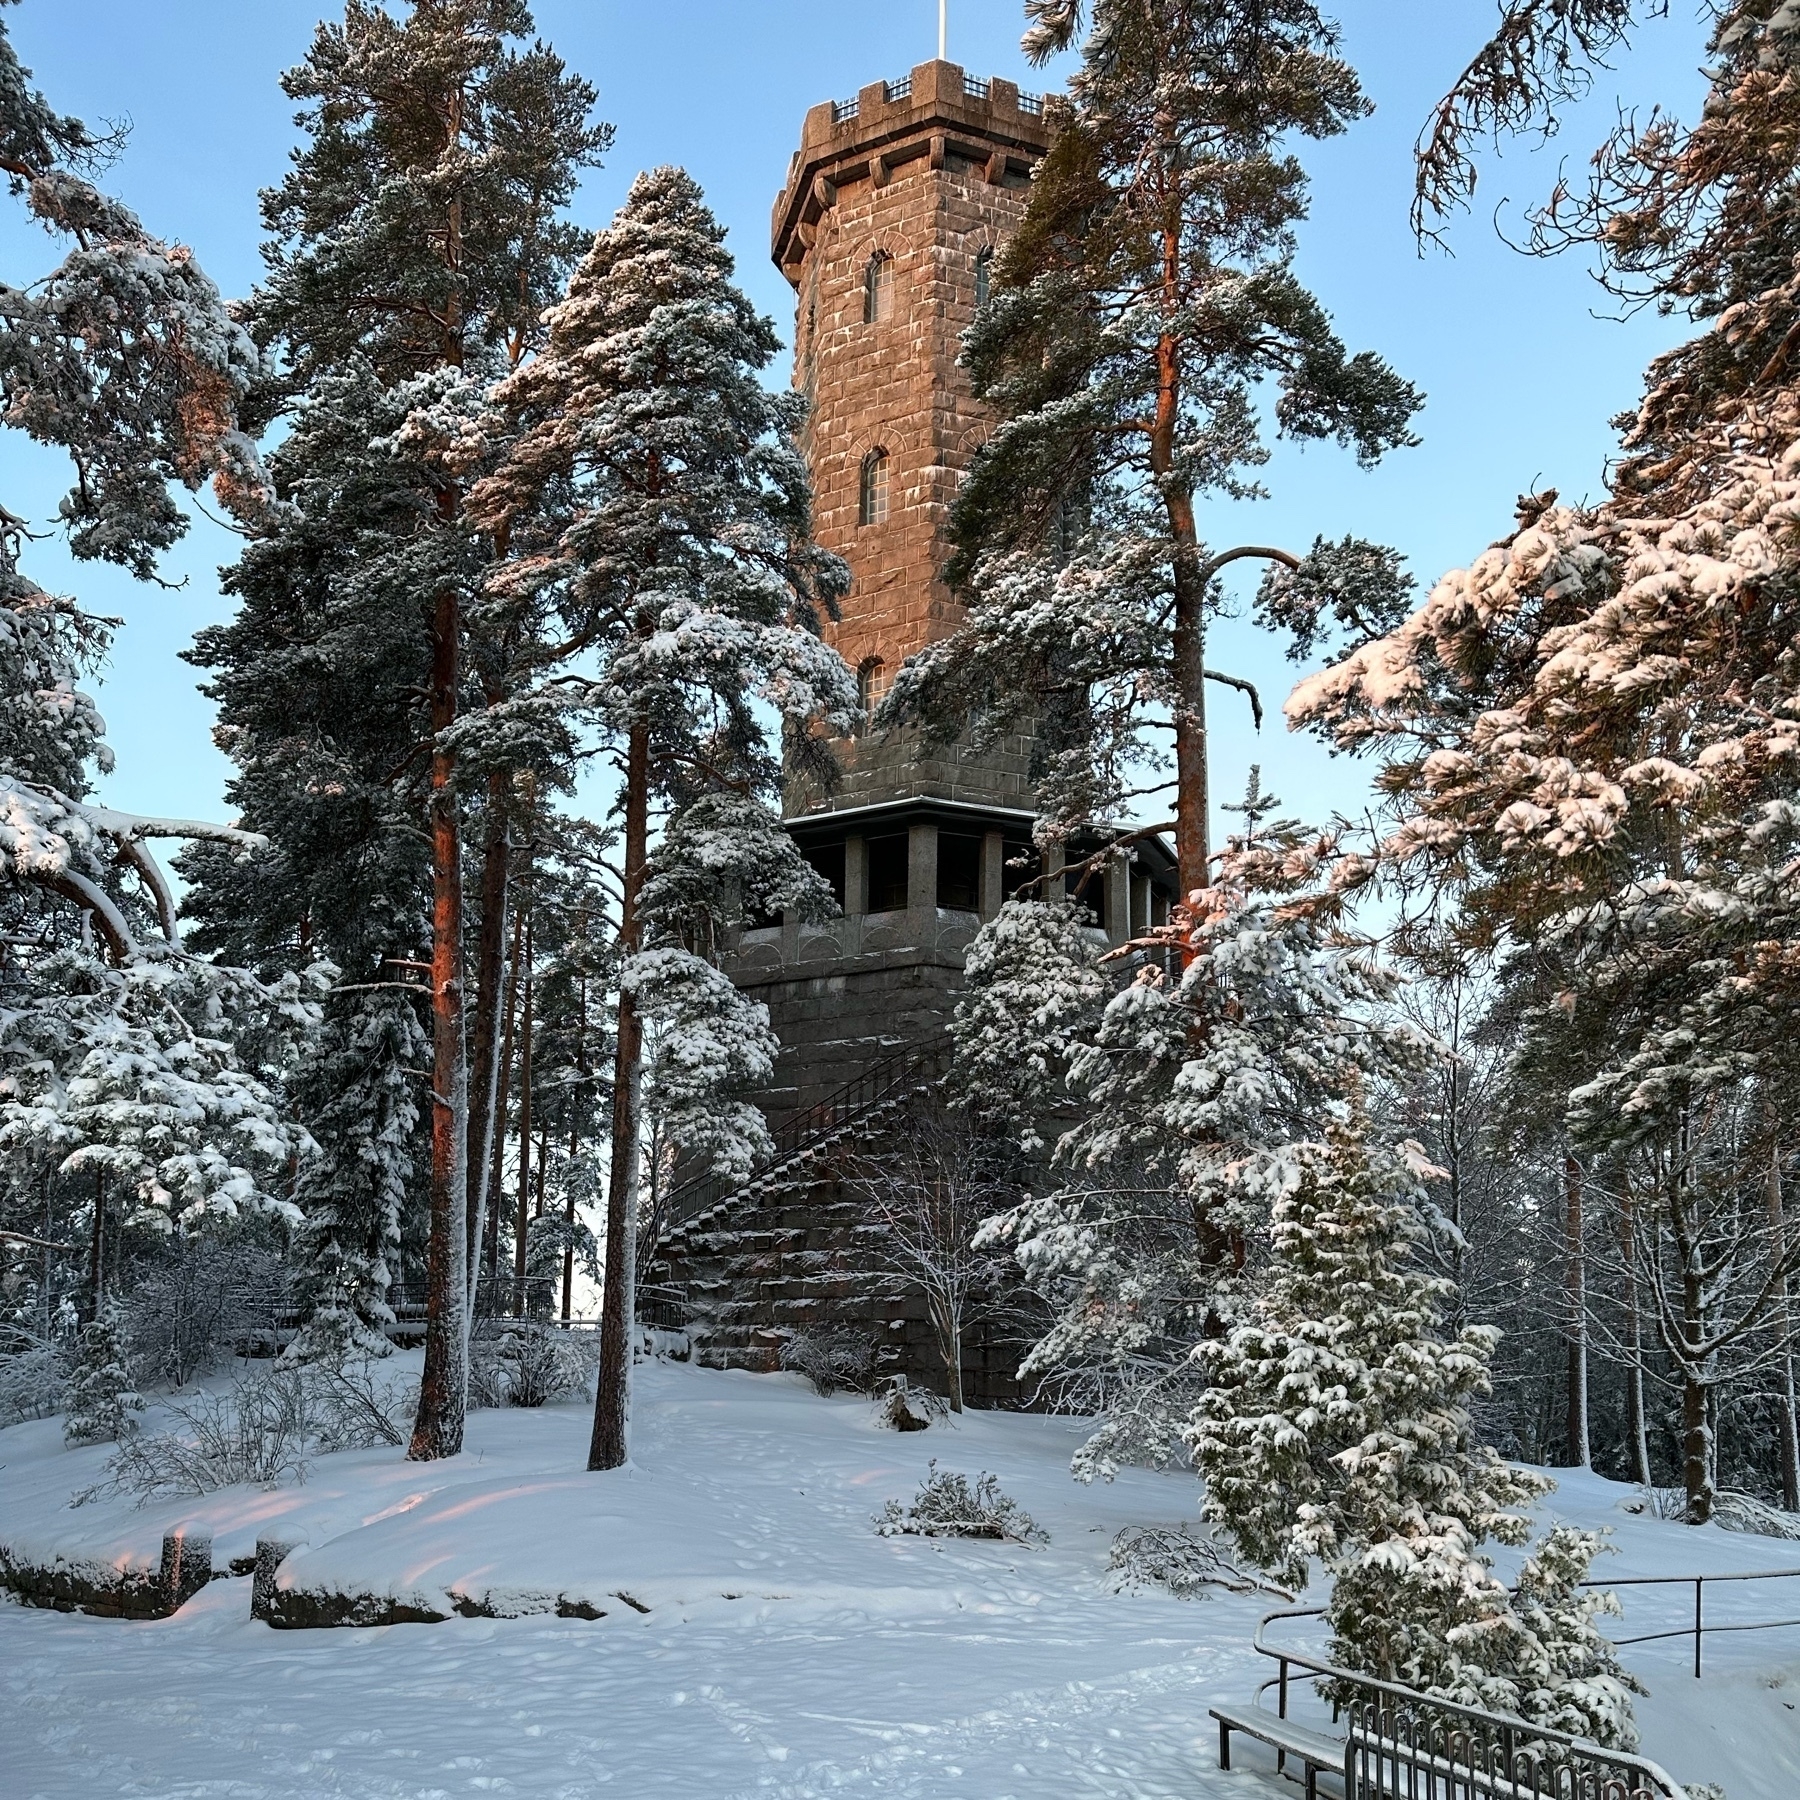 sightseeing tower built of granite, faux romantic style at Aulanko Hämeenlinna. Rising sun caressing the frozen stone edifice